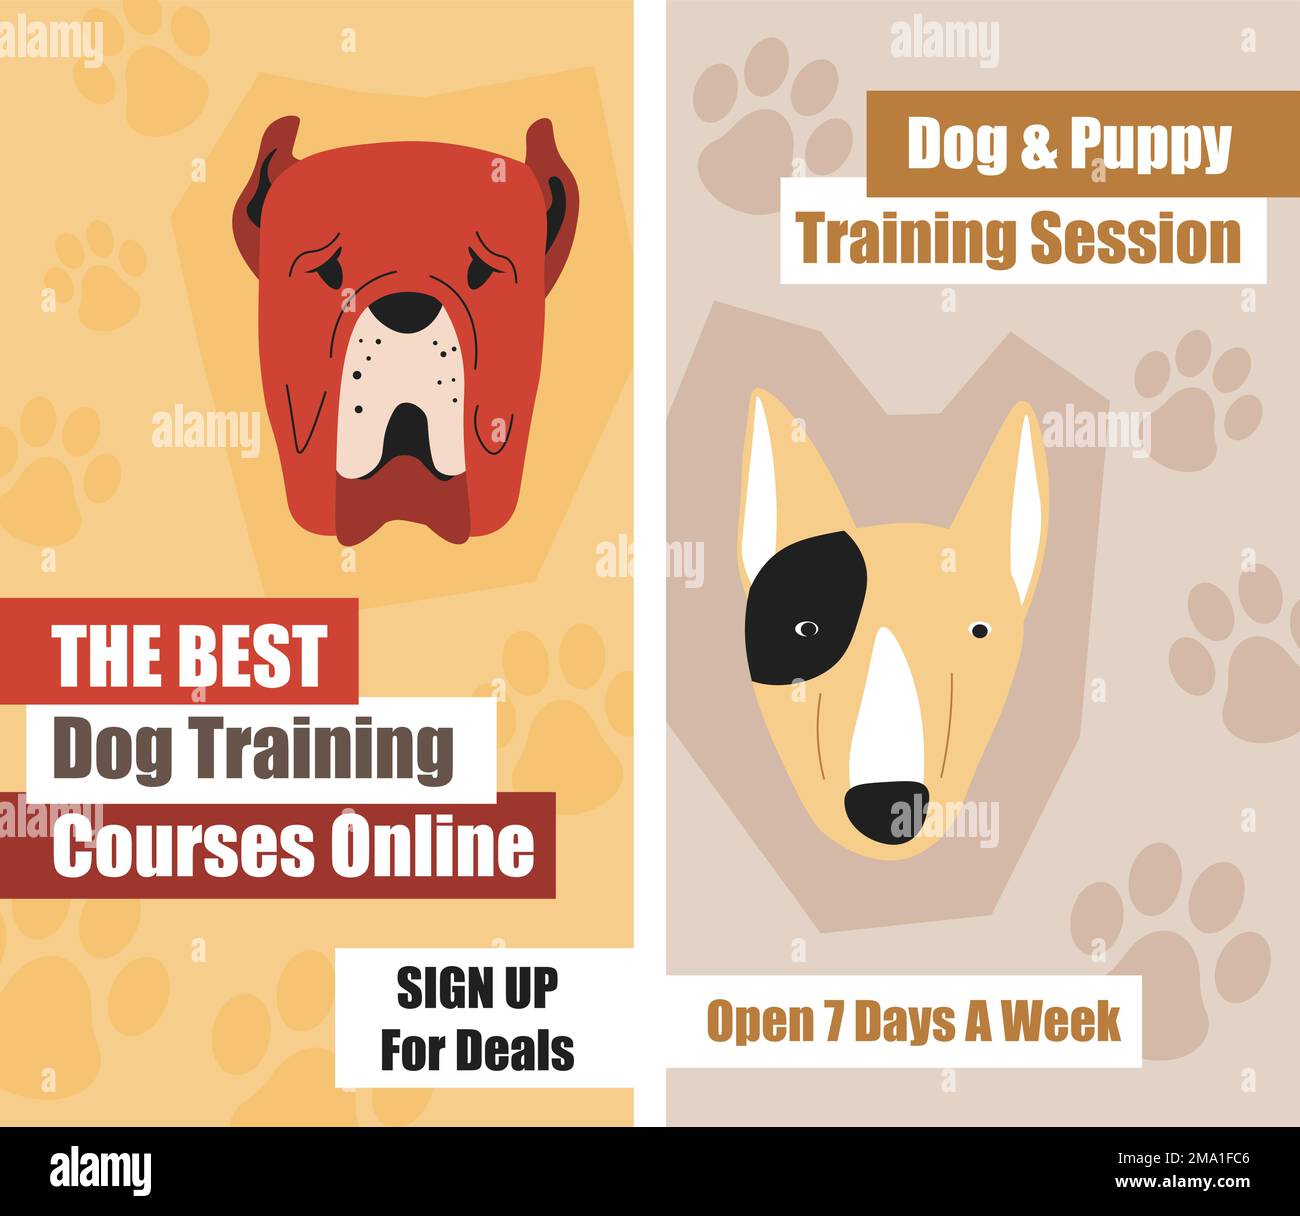 Dog and puppy training session, courses online Stock Vector